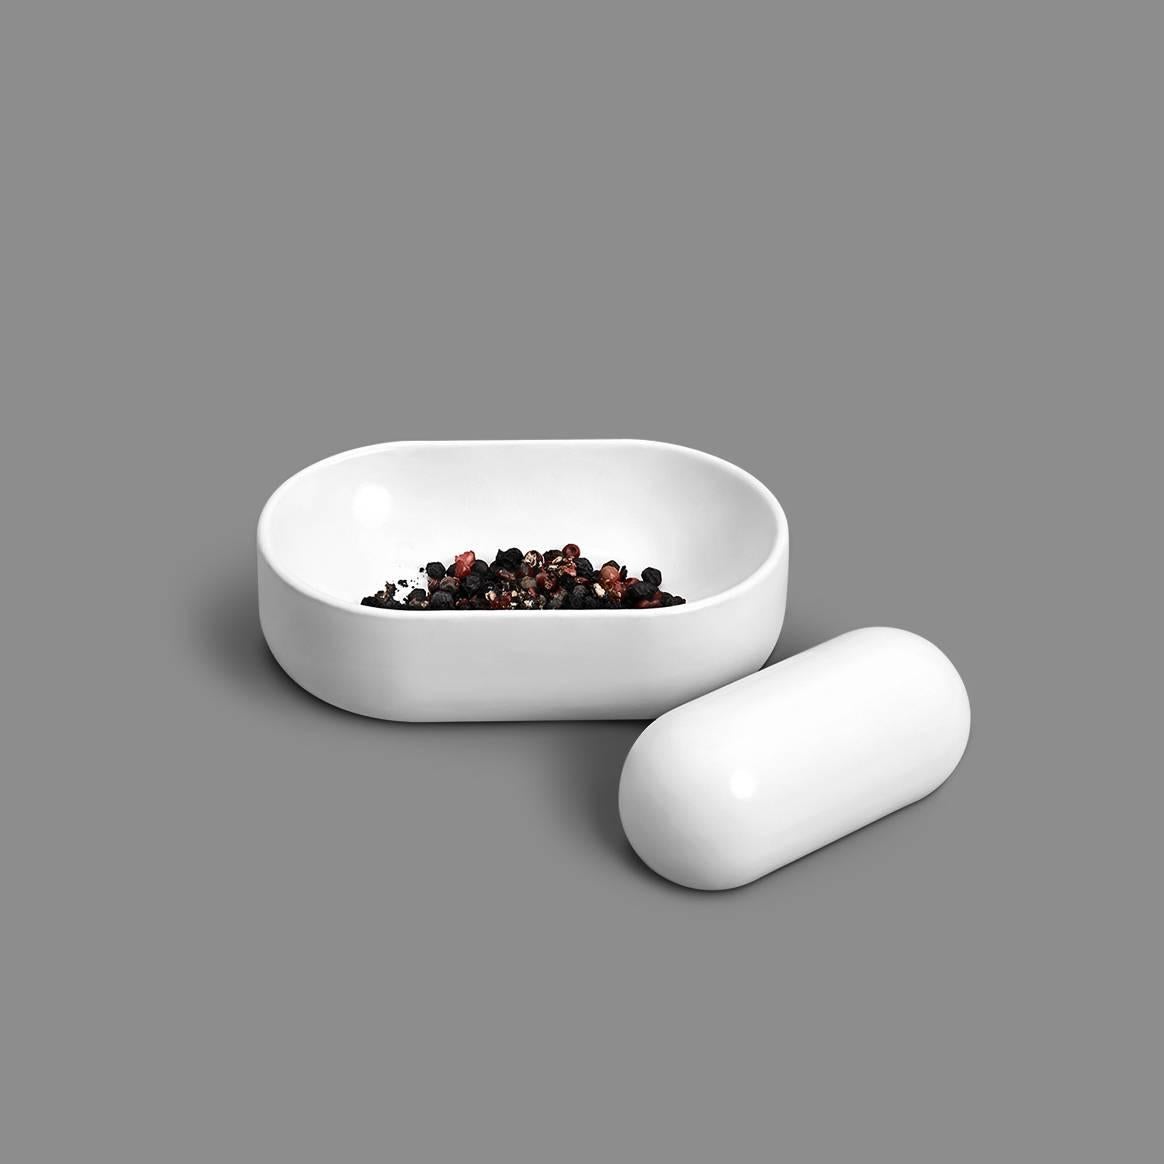 The Pill mortar and pestle was inspired by the simultaneously rudimentary and nuanced act of crushing and mixing spices. This design explores multiple thicknesses in porcelain and various finishes, only possible through 3D printing, to explore a